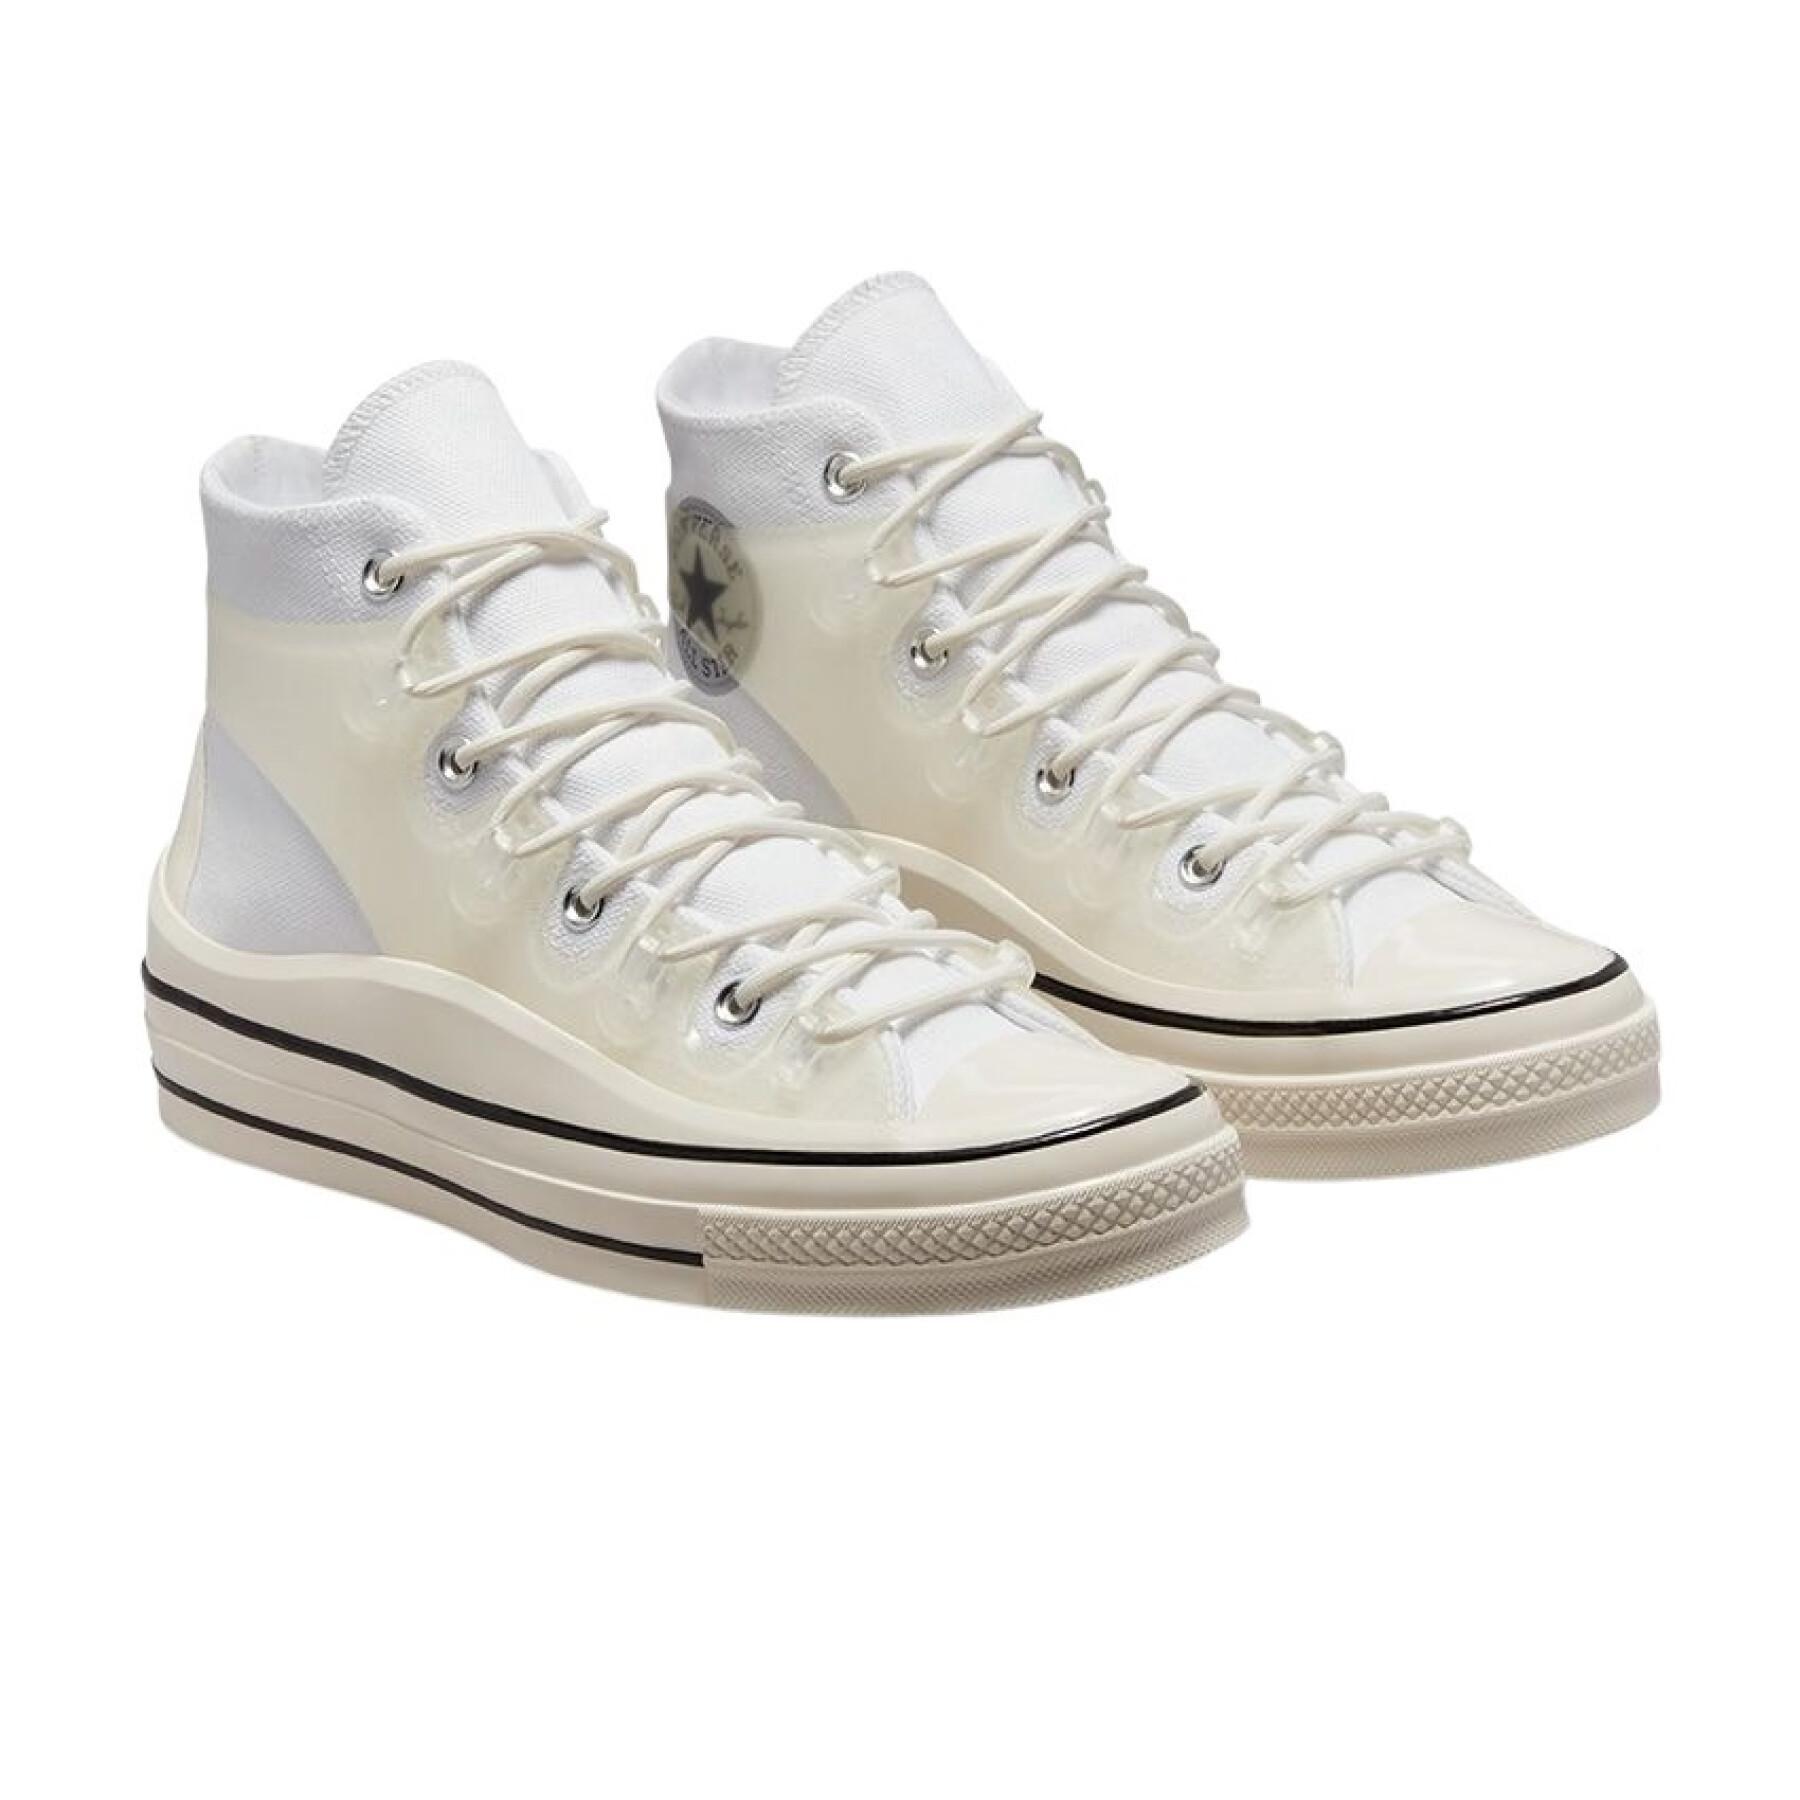 Sneakers Converse Street Utility Chuck 70 Utility